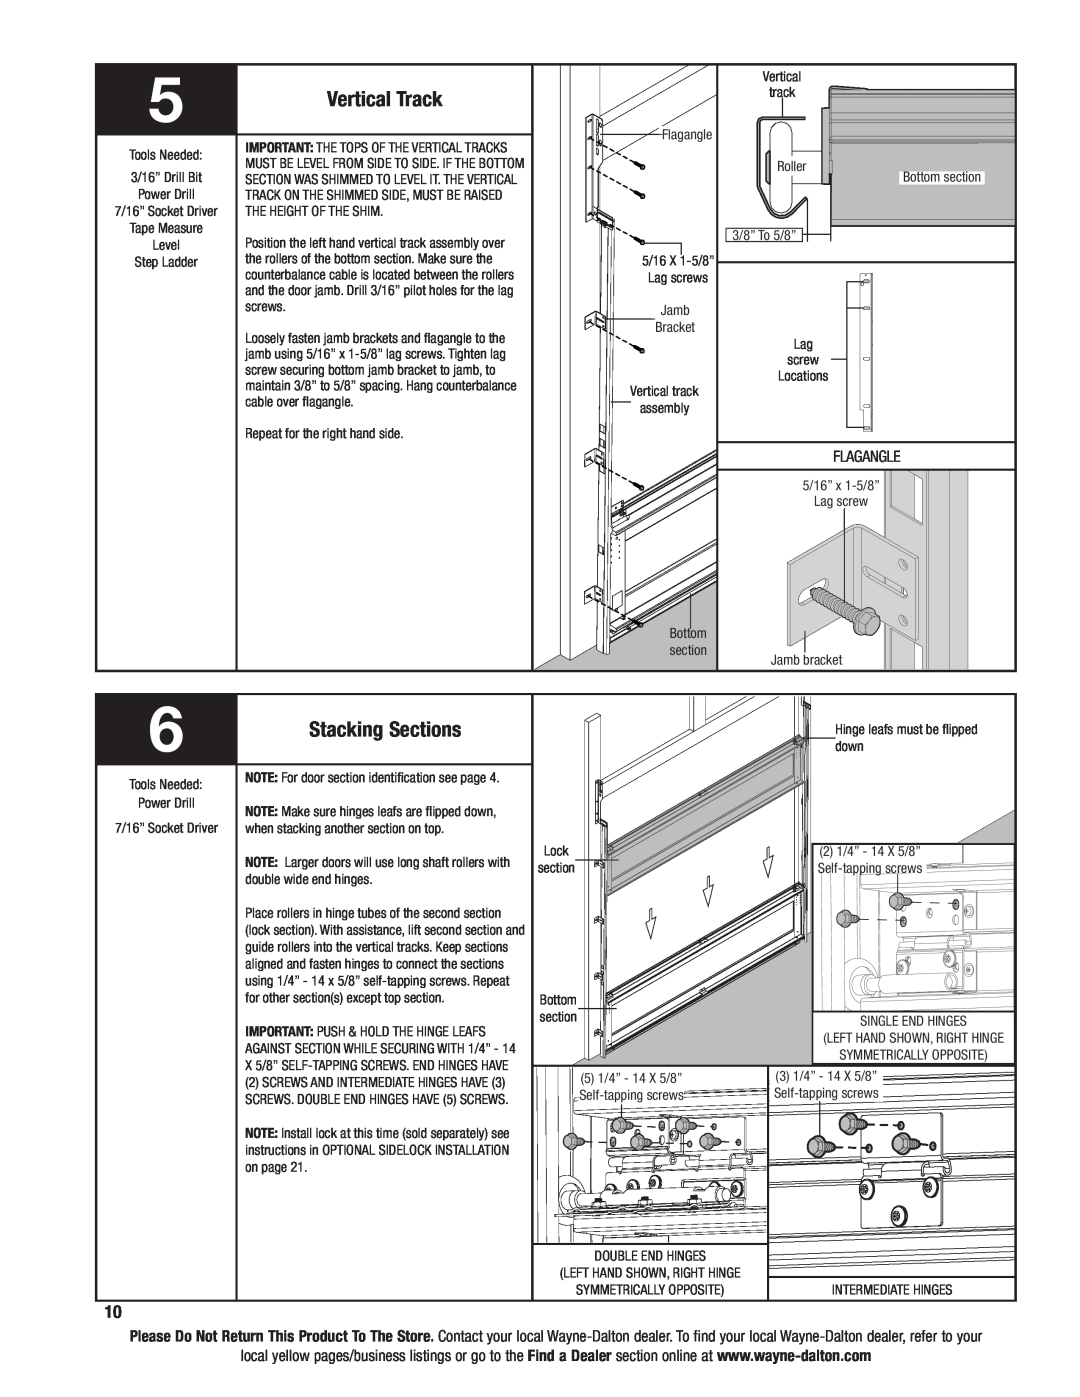 Wayne-Dalton 6100 installation instructions Vertical Track, Stacking Sections, Flagangle 